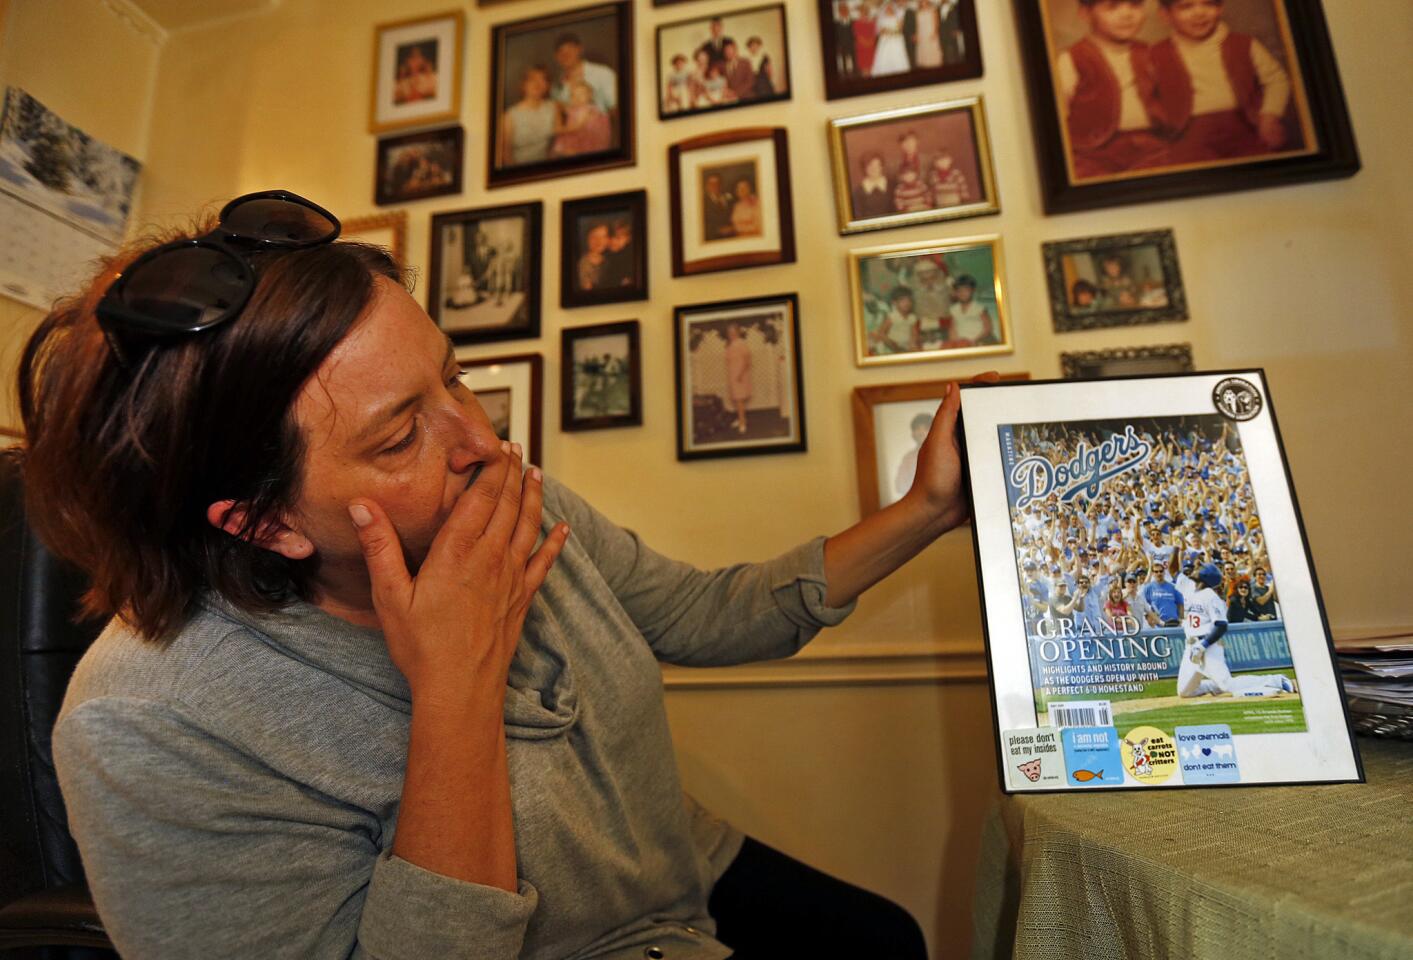 Mandy Pifer, girlfriend of Los Angeles resident Shannon Johnson, who was one of 14 people killed in the San Bernardino shooting rampage on Wednesday, shows a framed LA Dodgers magazine cover with Johnson pictured in the crowd that hangs on a wall of family photos and memorabilia in his apartment.